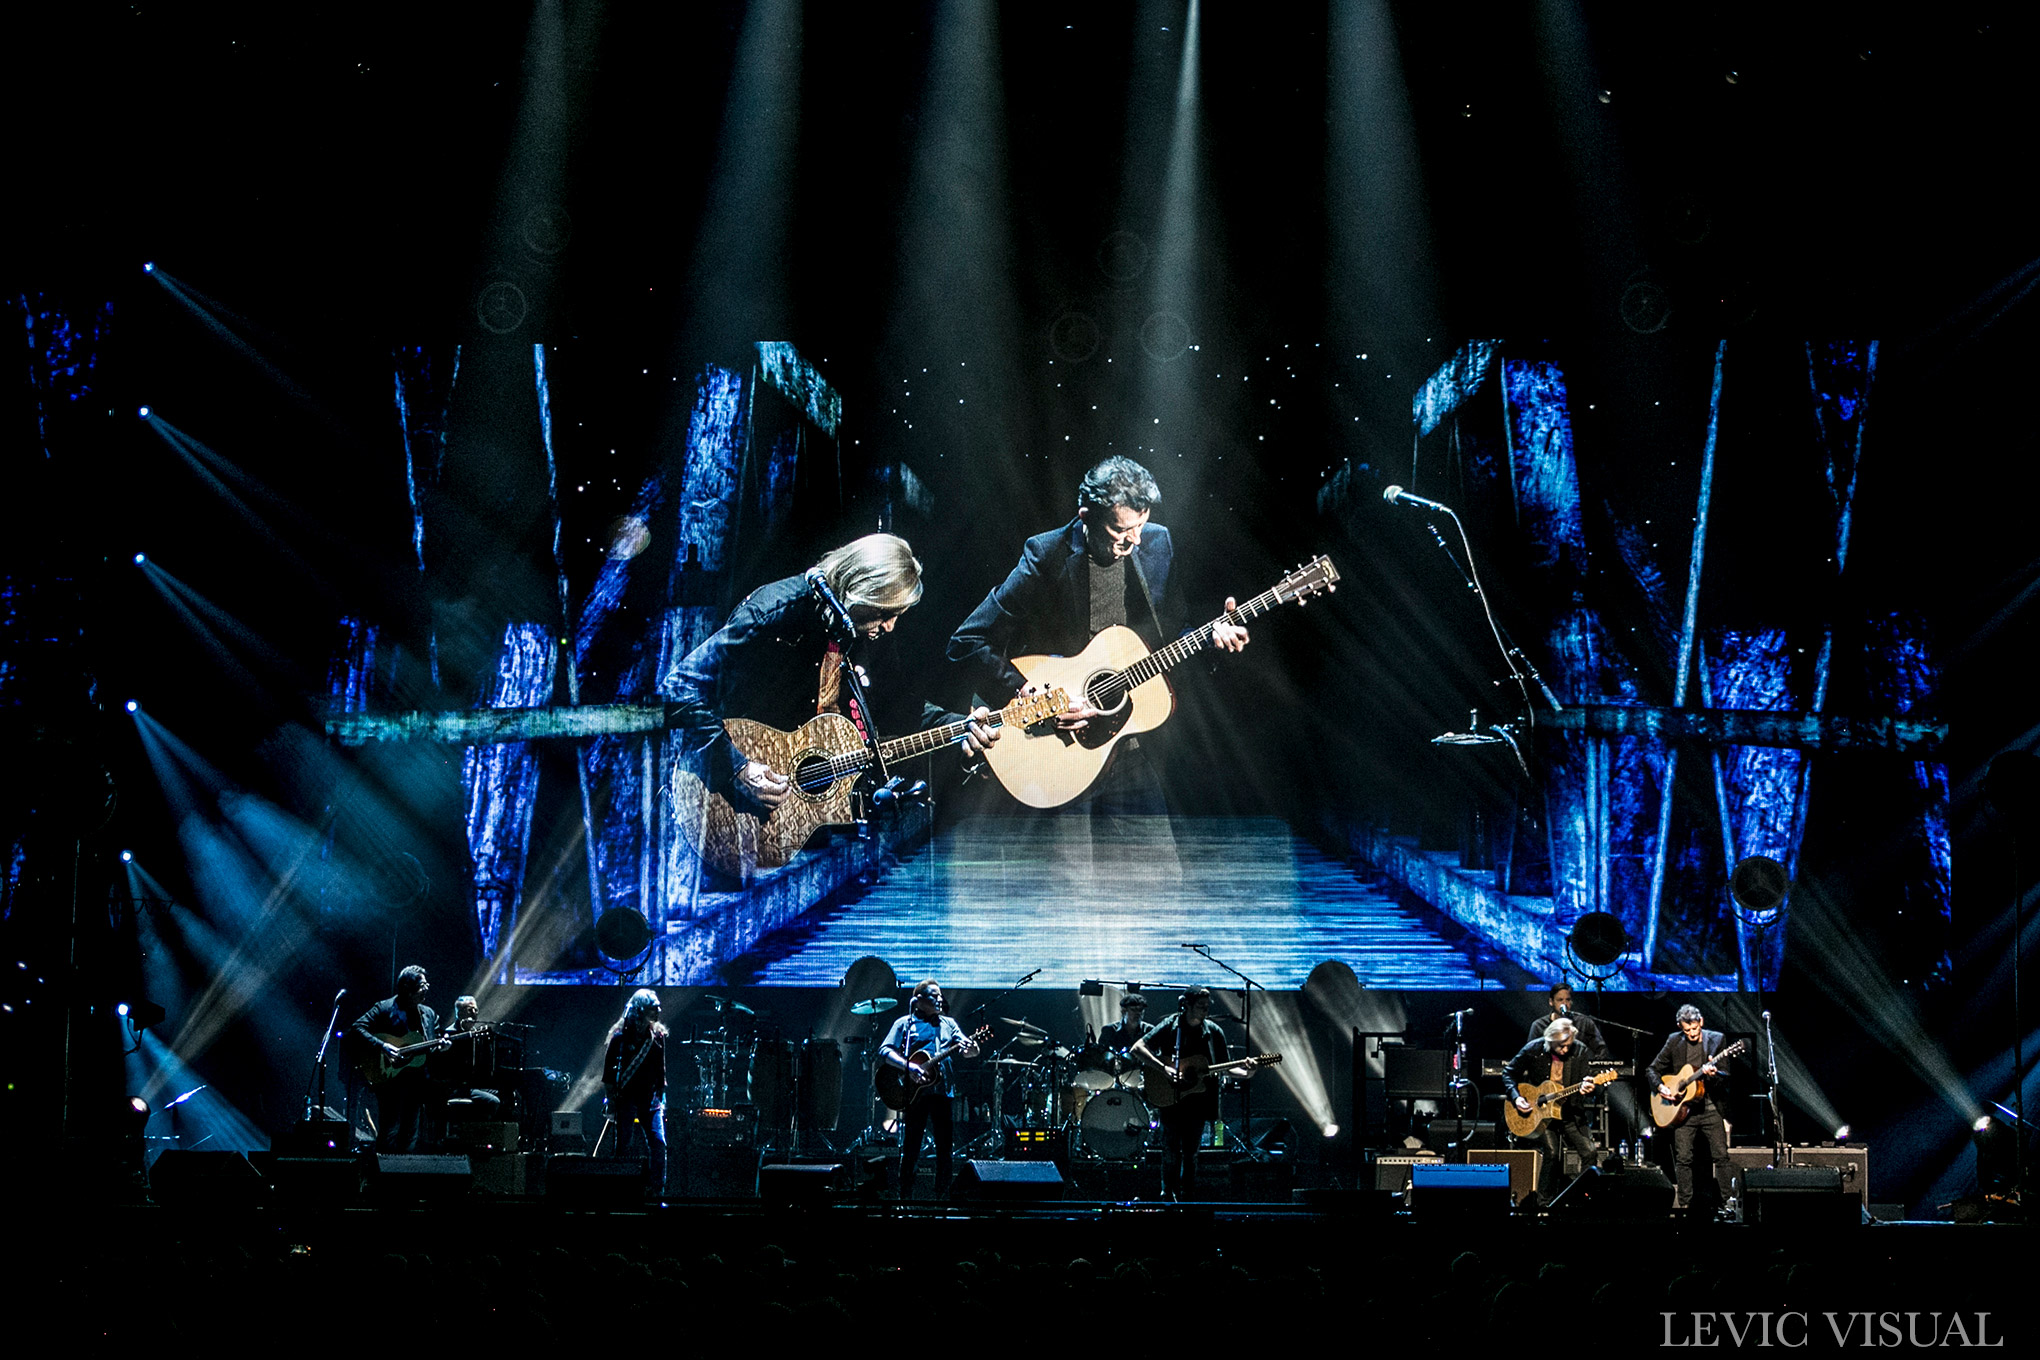 Concert Review The Eagles, Auckland New Zealand, 2019